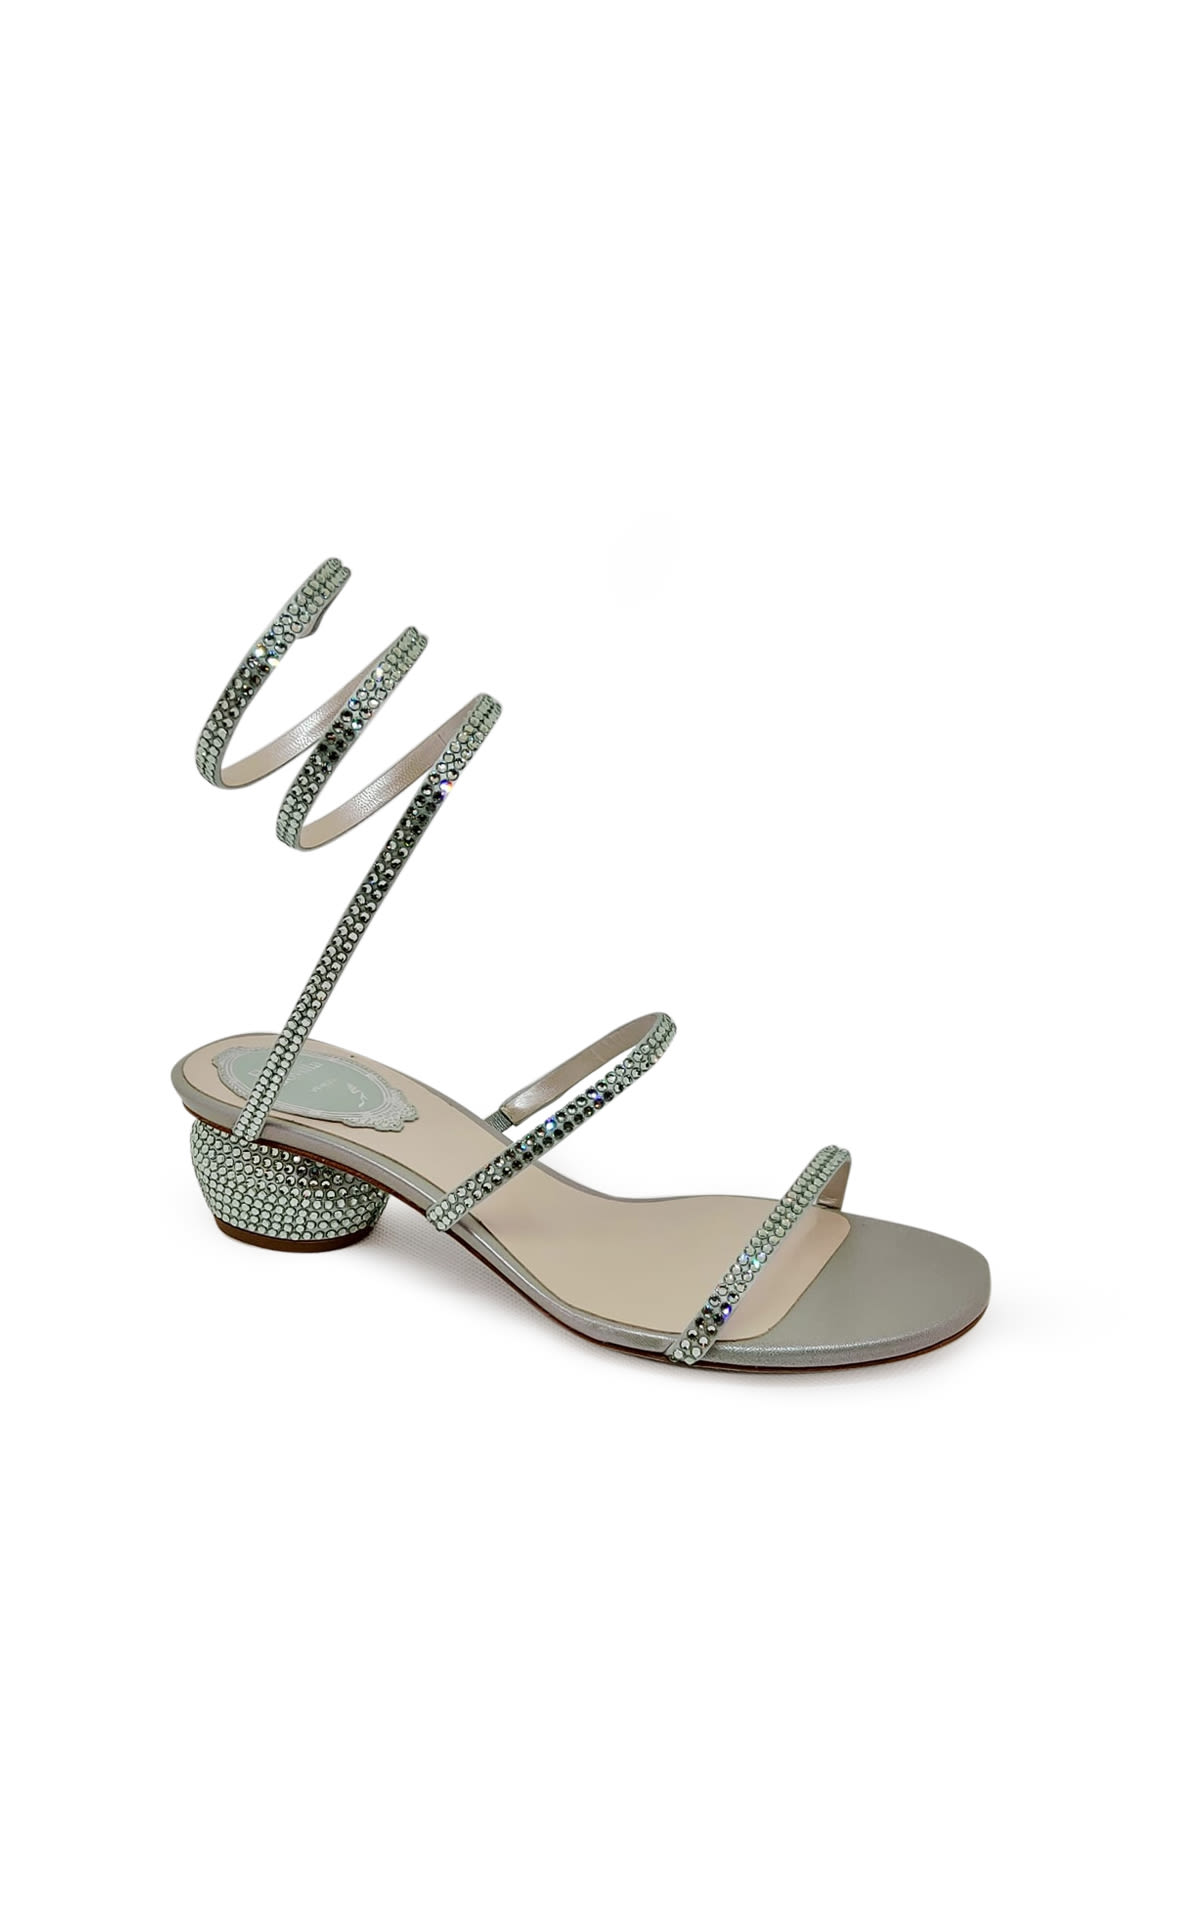 Cleo sandals in green satin